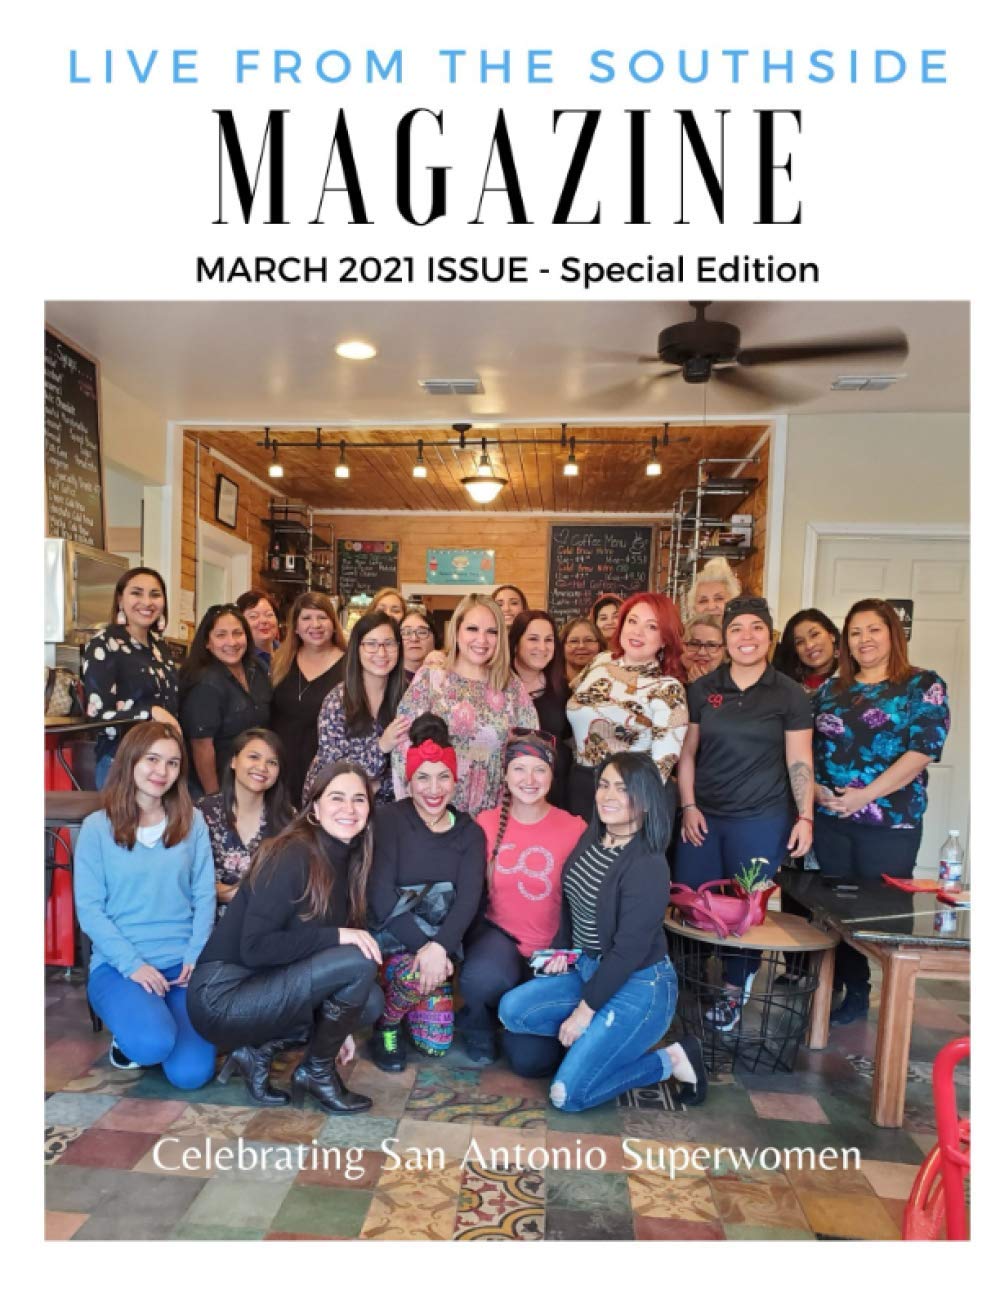 Live from the Southside Magazine: Local Texas Magazine on San Antonio's Southside and Surrounding Areas